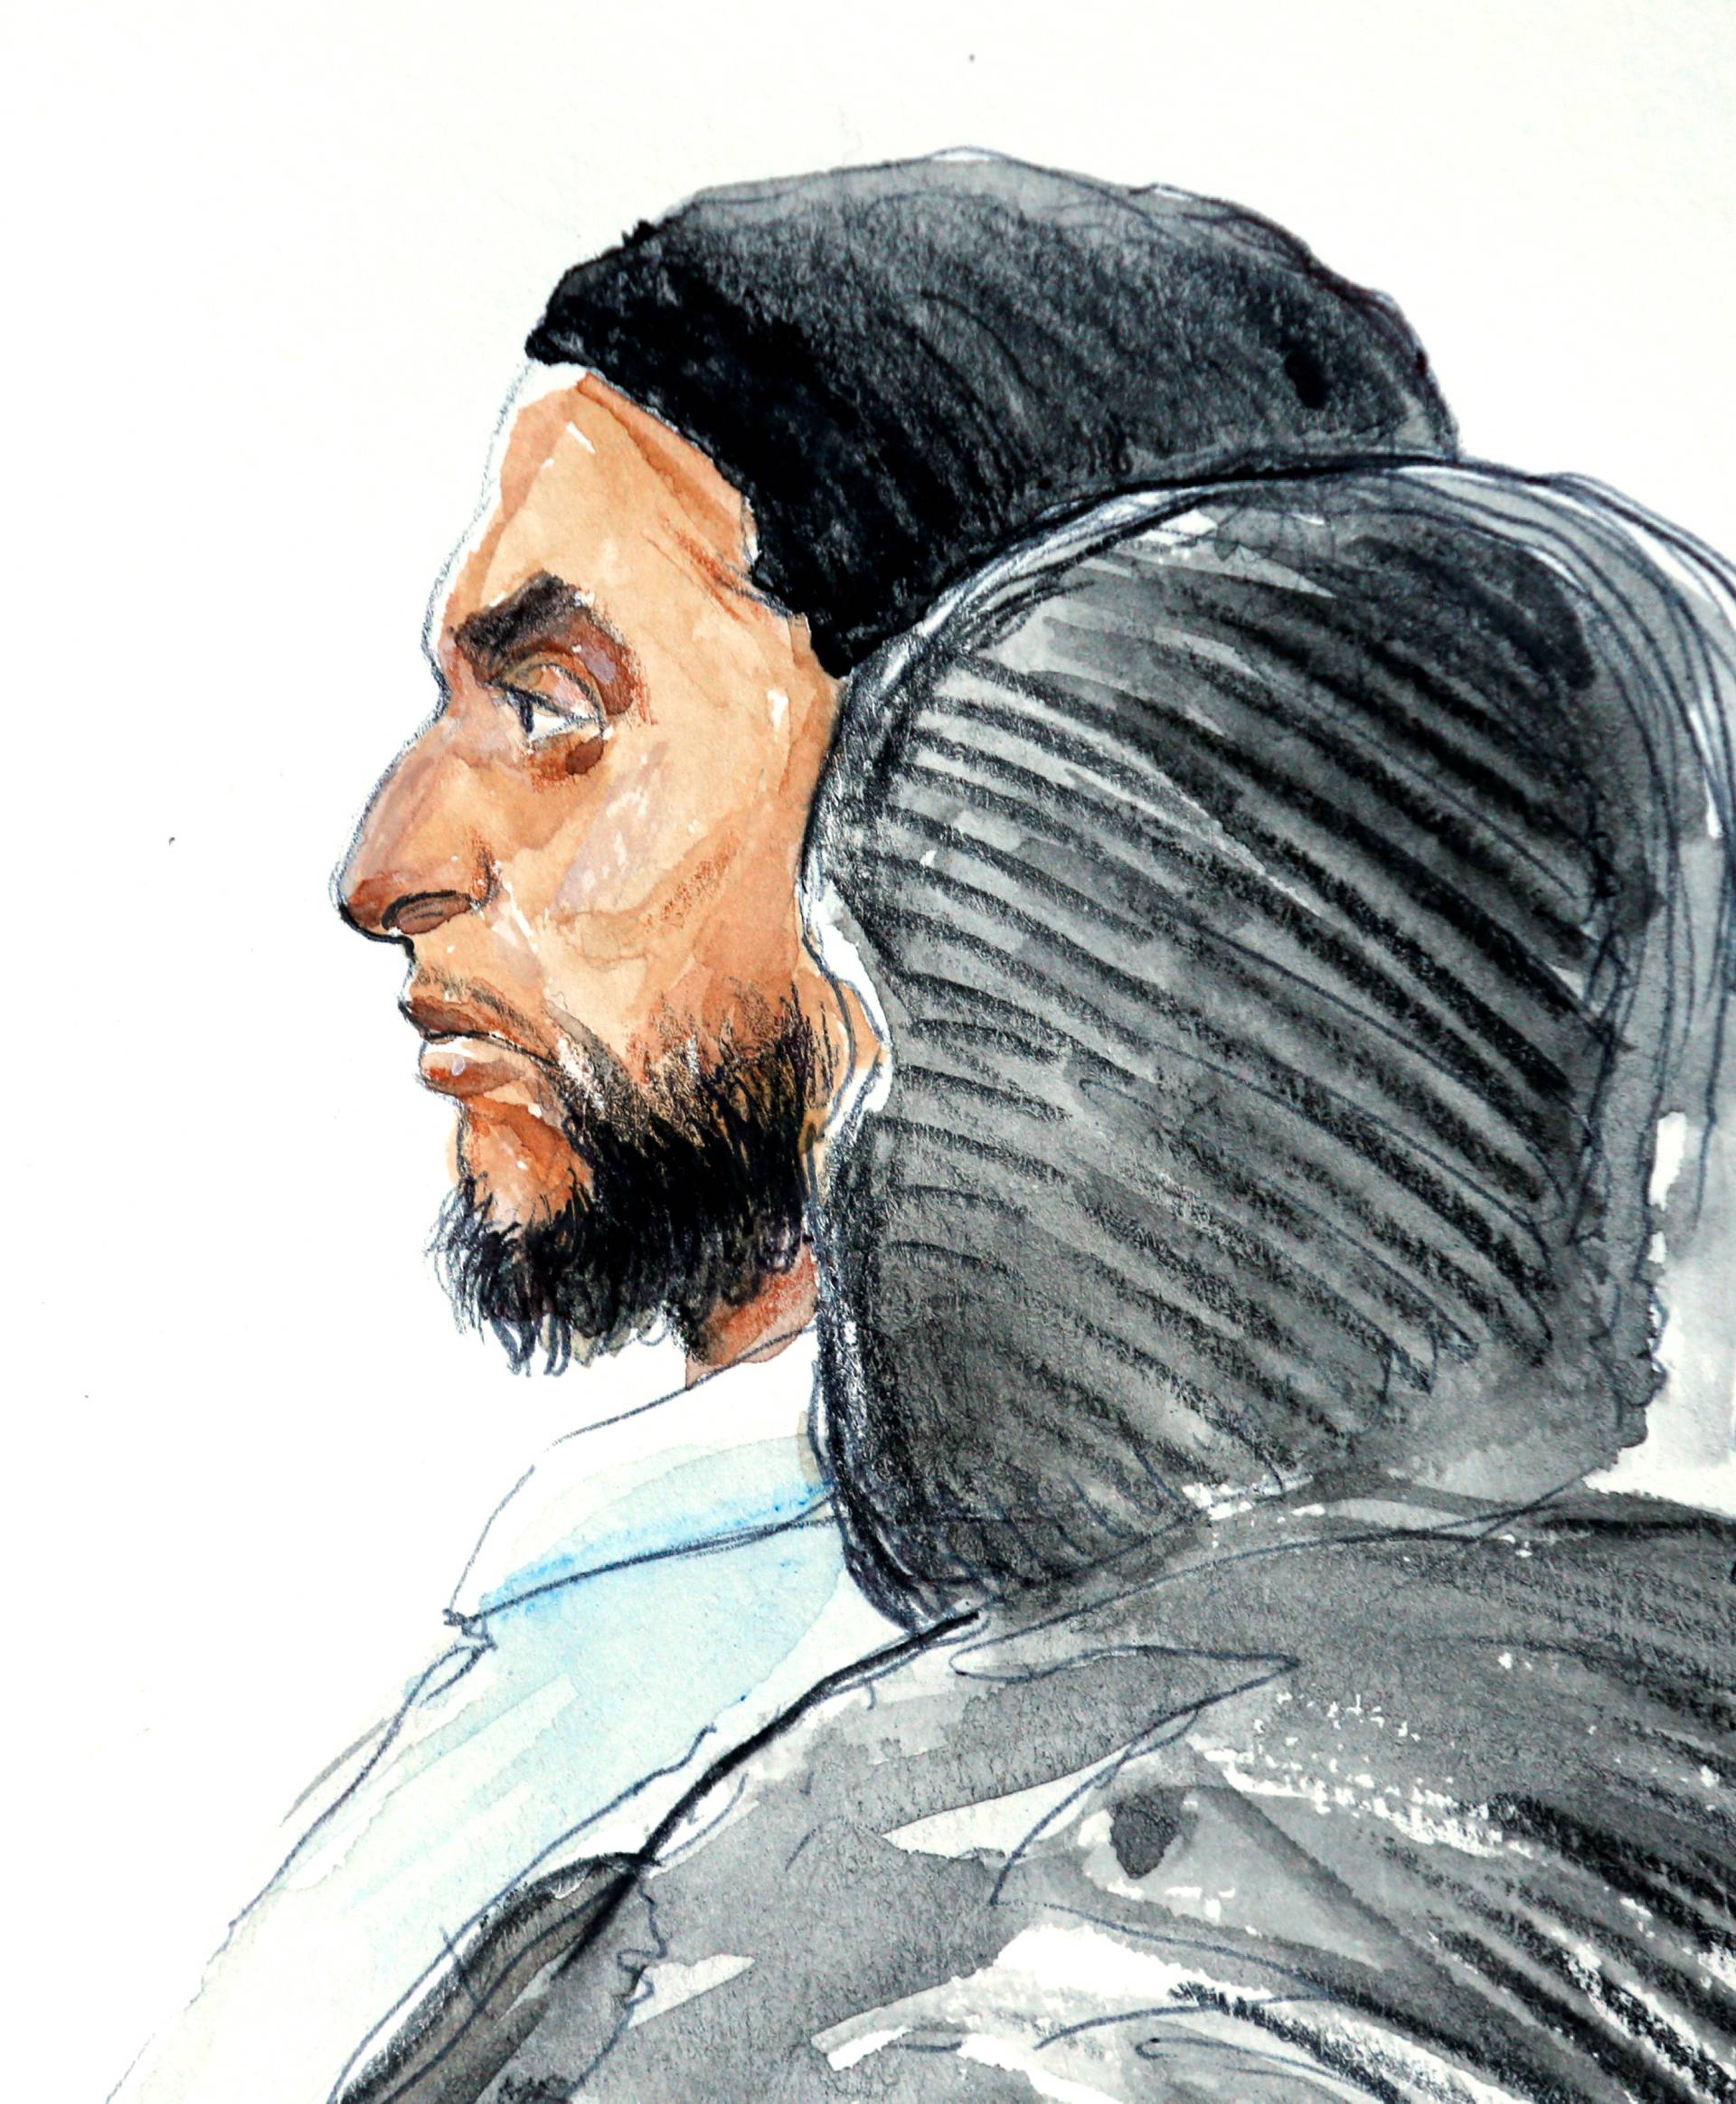 A court artist drawing shows Salah Abdeslam, one of the suspects in the 2015 Islamic State attacks in Paris, in court during his trial in Brussels